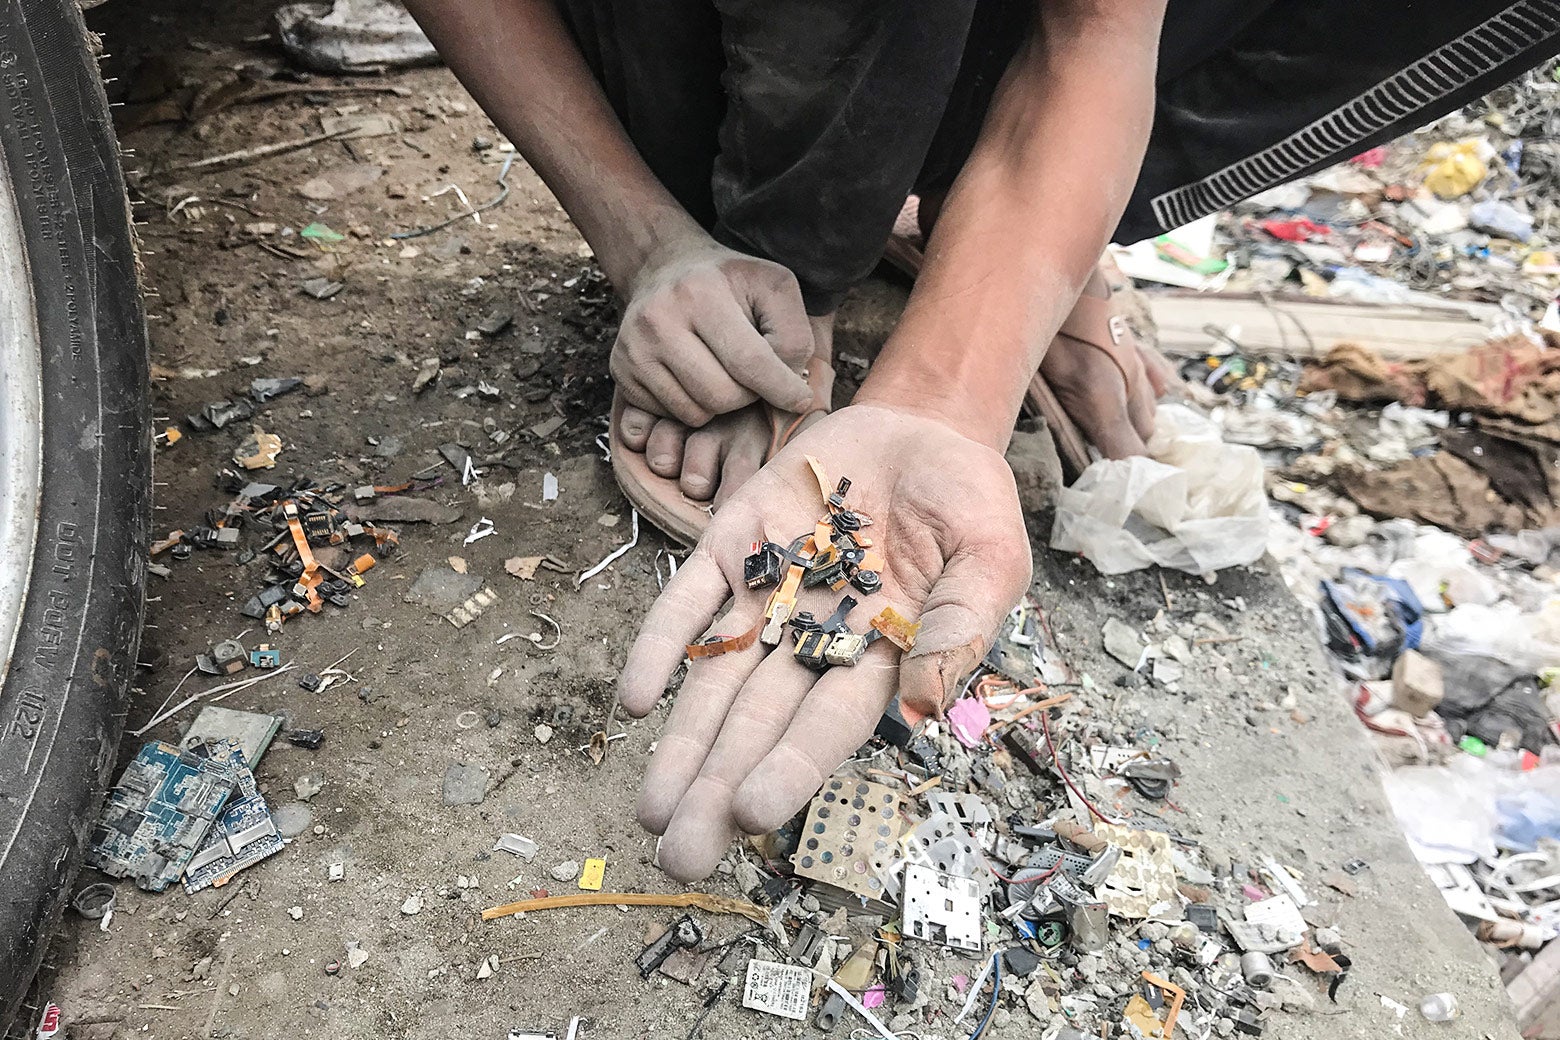 A boy, crouched, extends his hand, which is filled with small chips and other cellphone parts. 